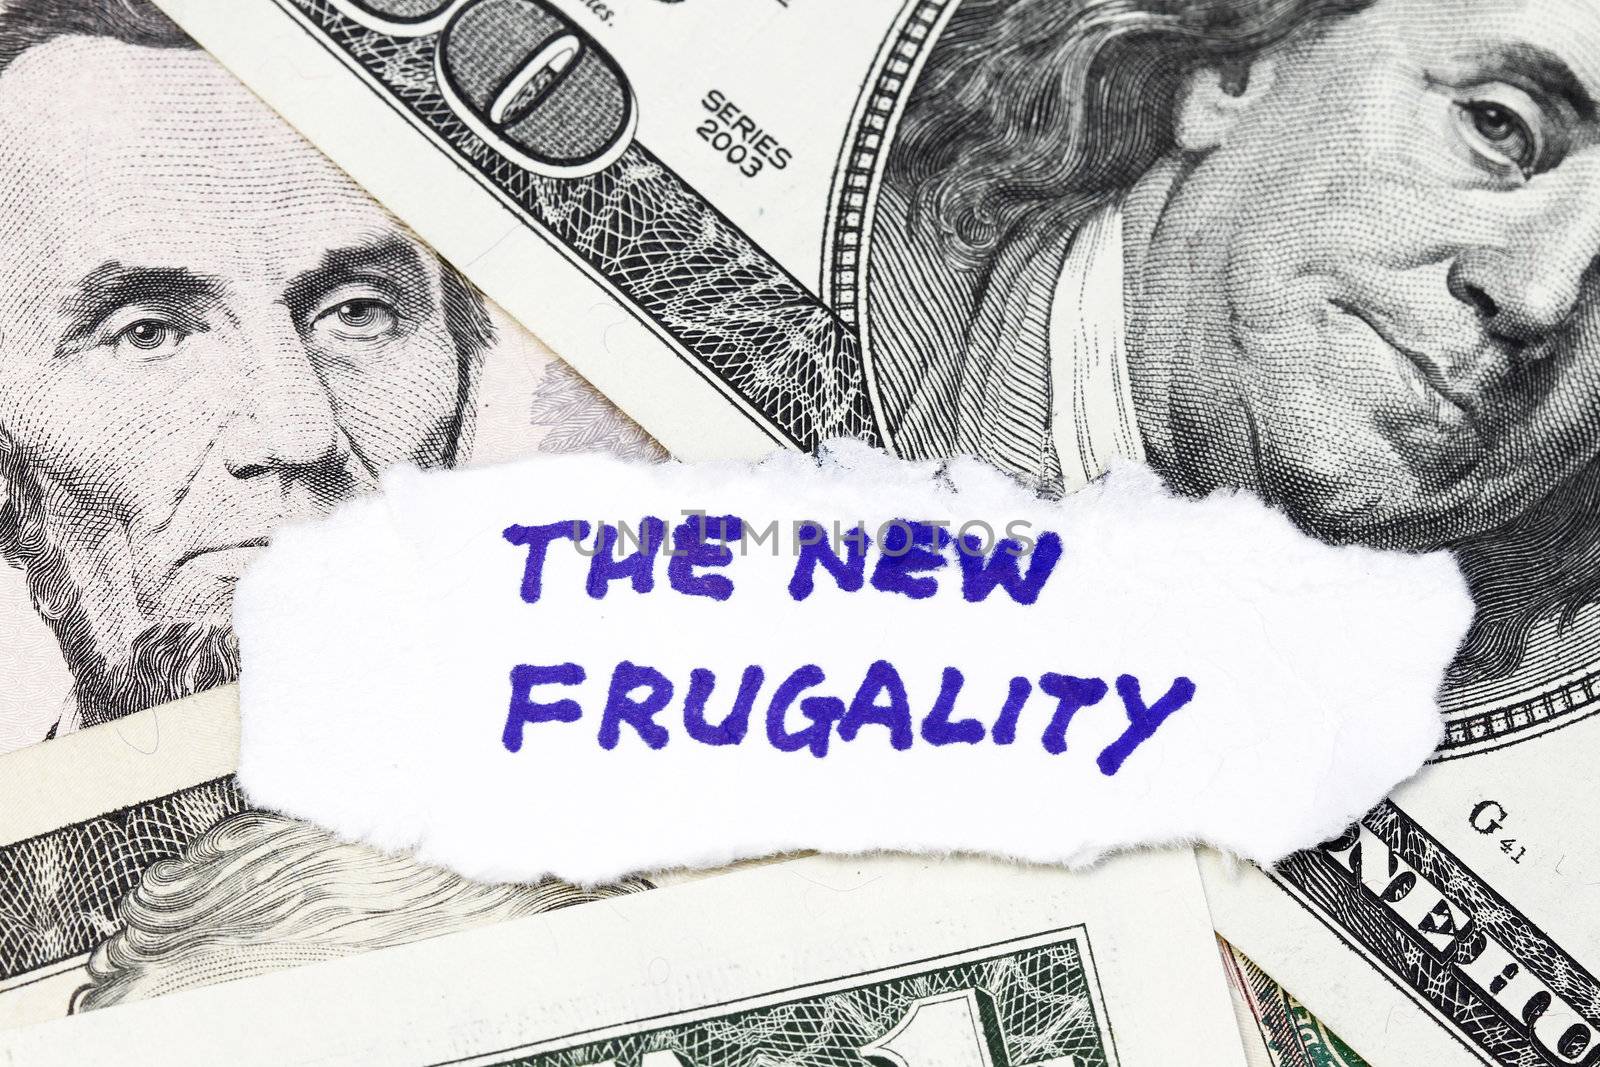 The new frugality by sacatani